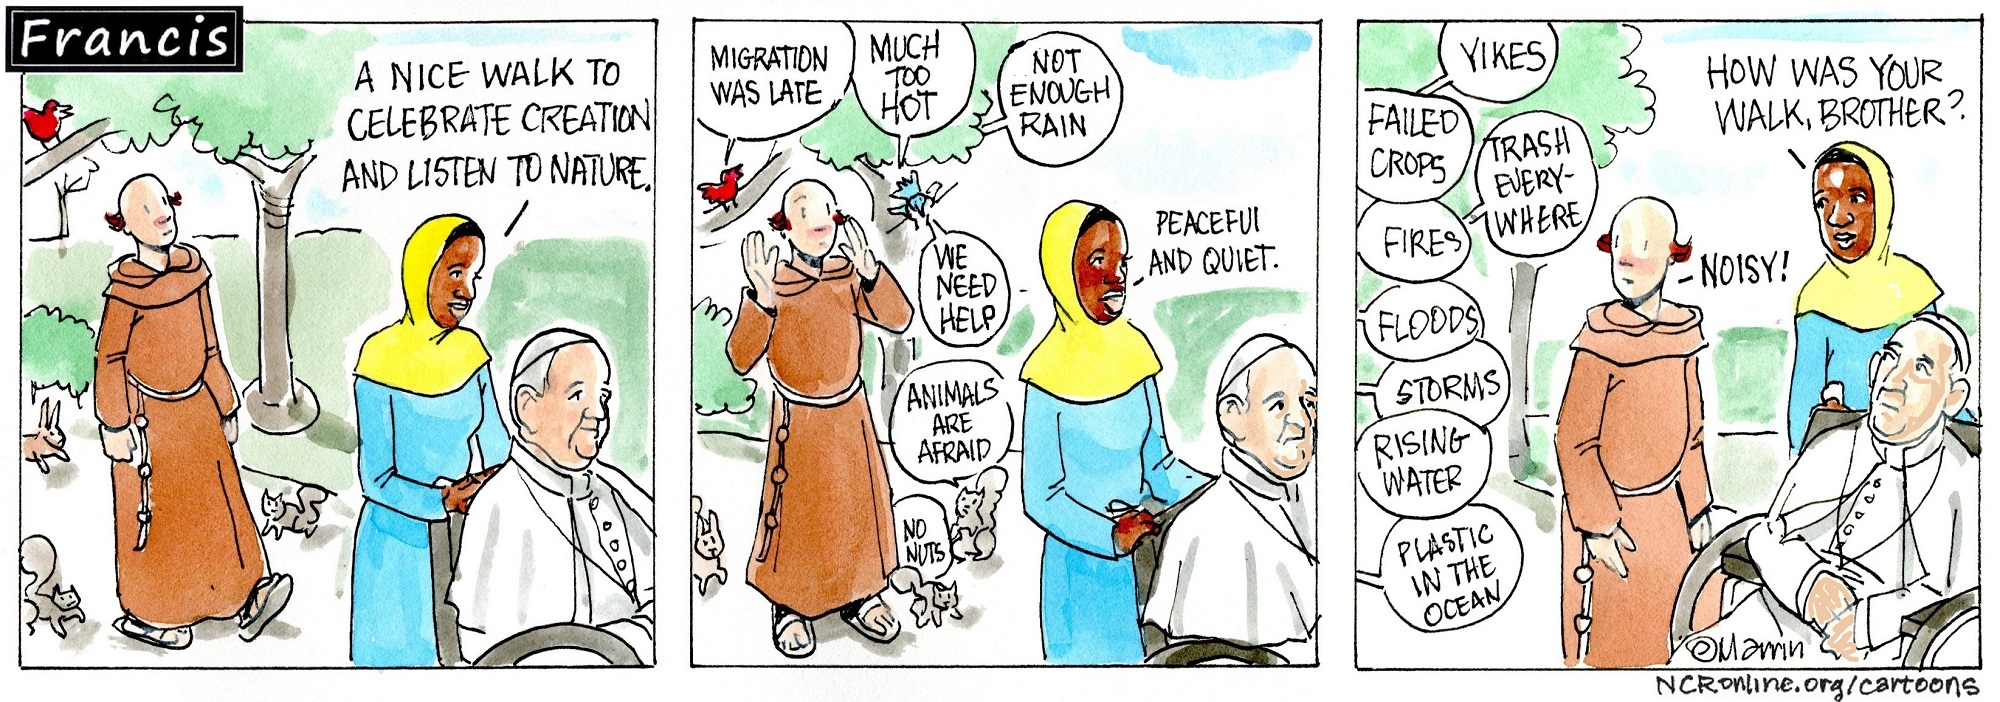 Francis, the comic strip: With a nice walk, you can listen to nature. What do you hear?